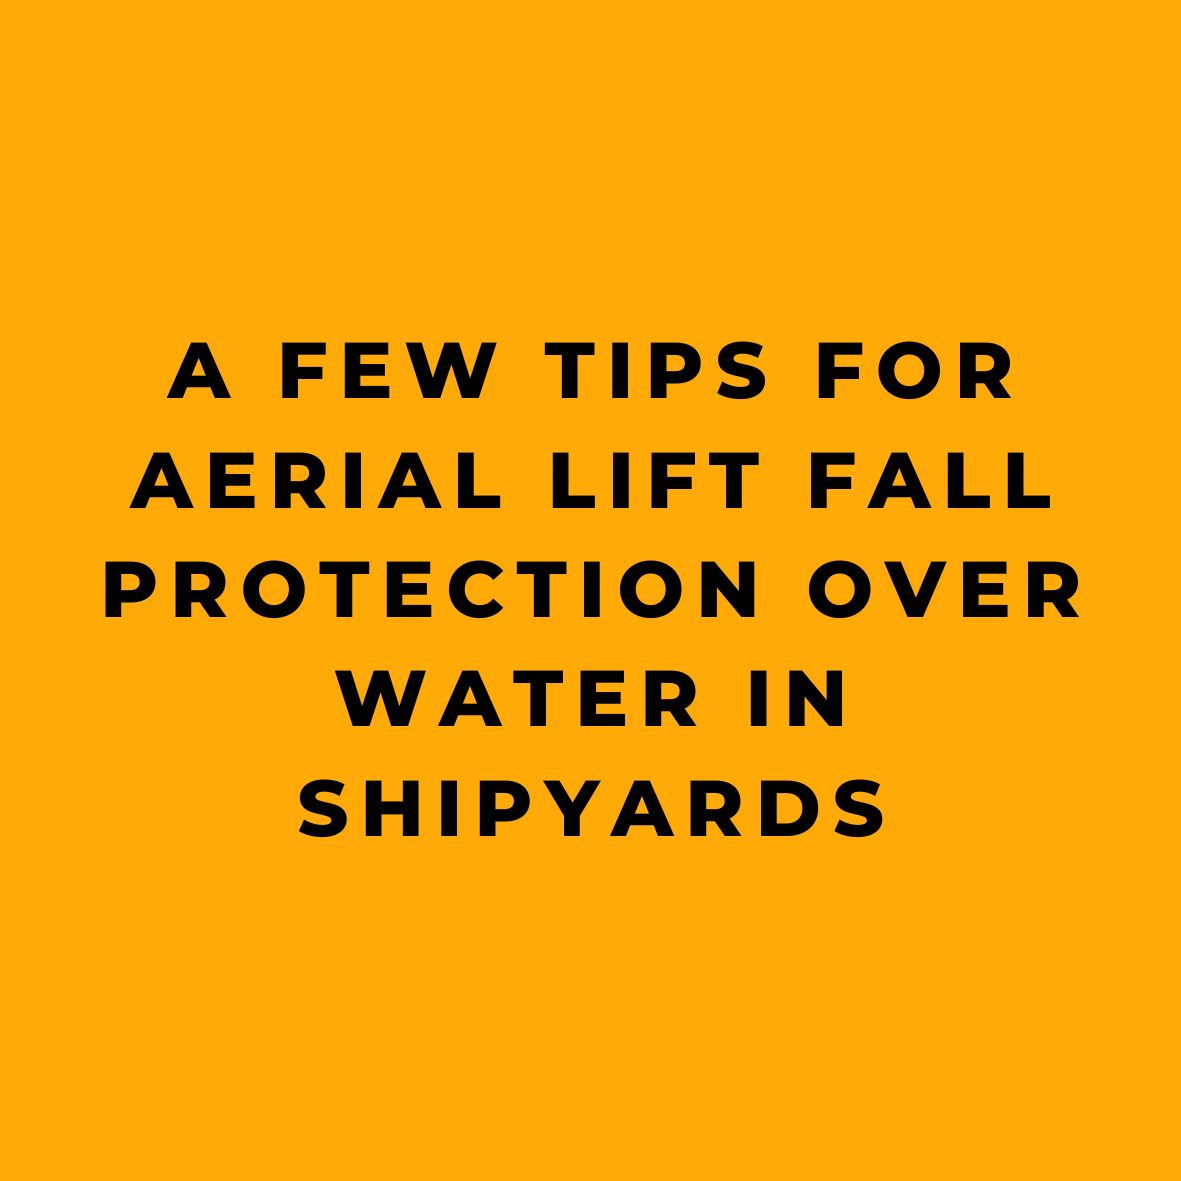 A Few Tips for Aerial Lift Fall Protection Over Water in Shipyards